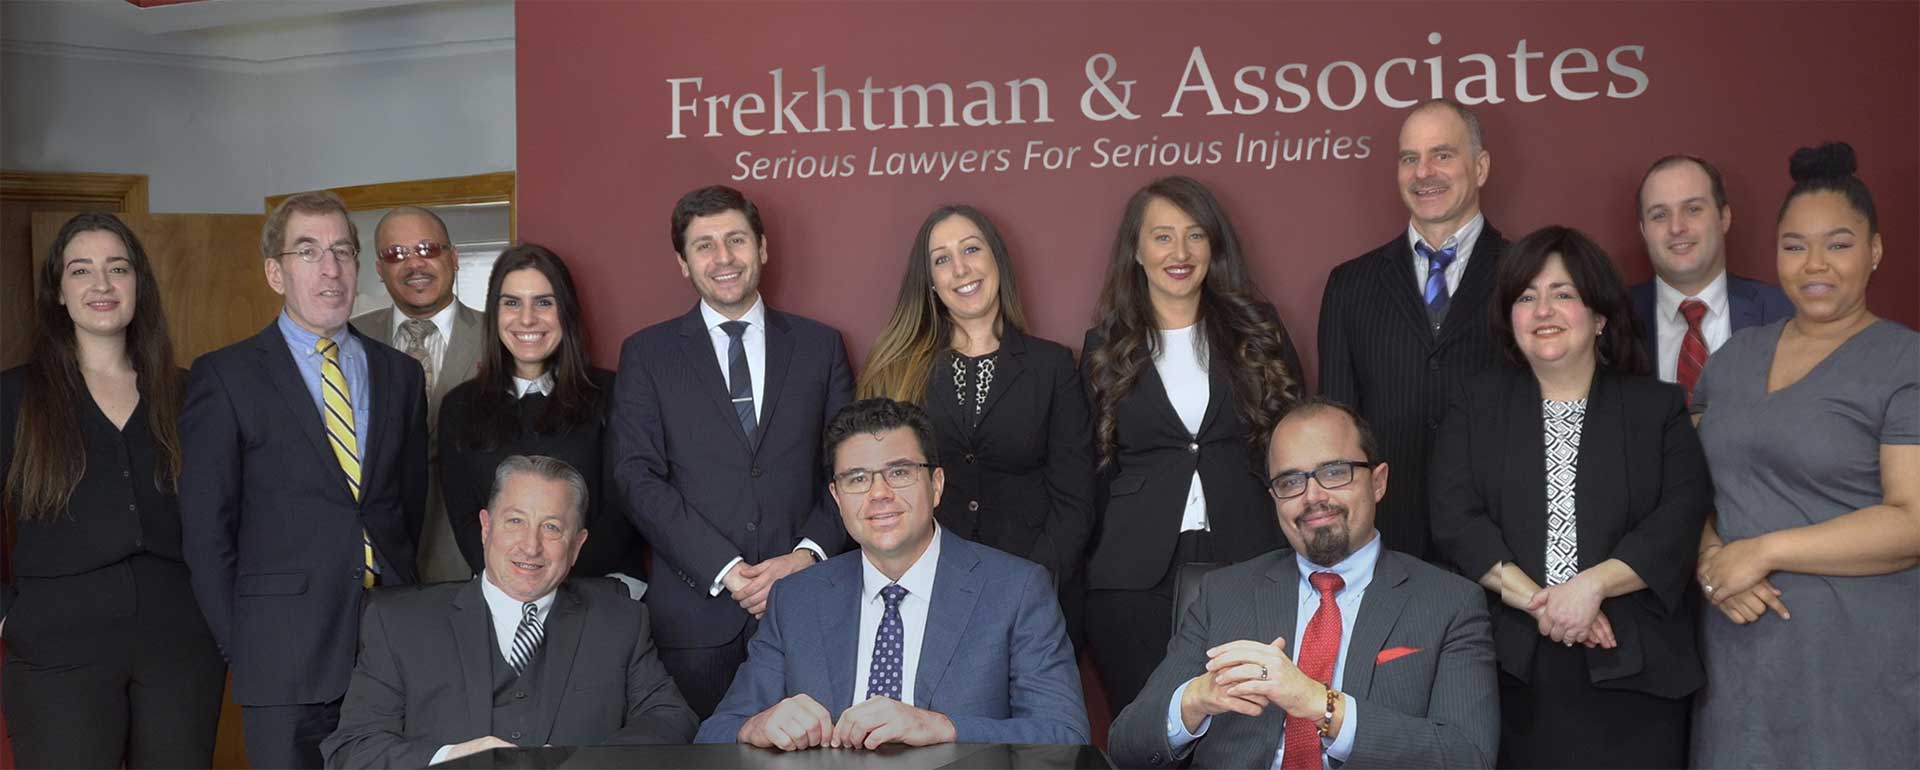 Frekhtman & Associates Injury and Accident Attorneys - New York (NY 10004), US, personal injury